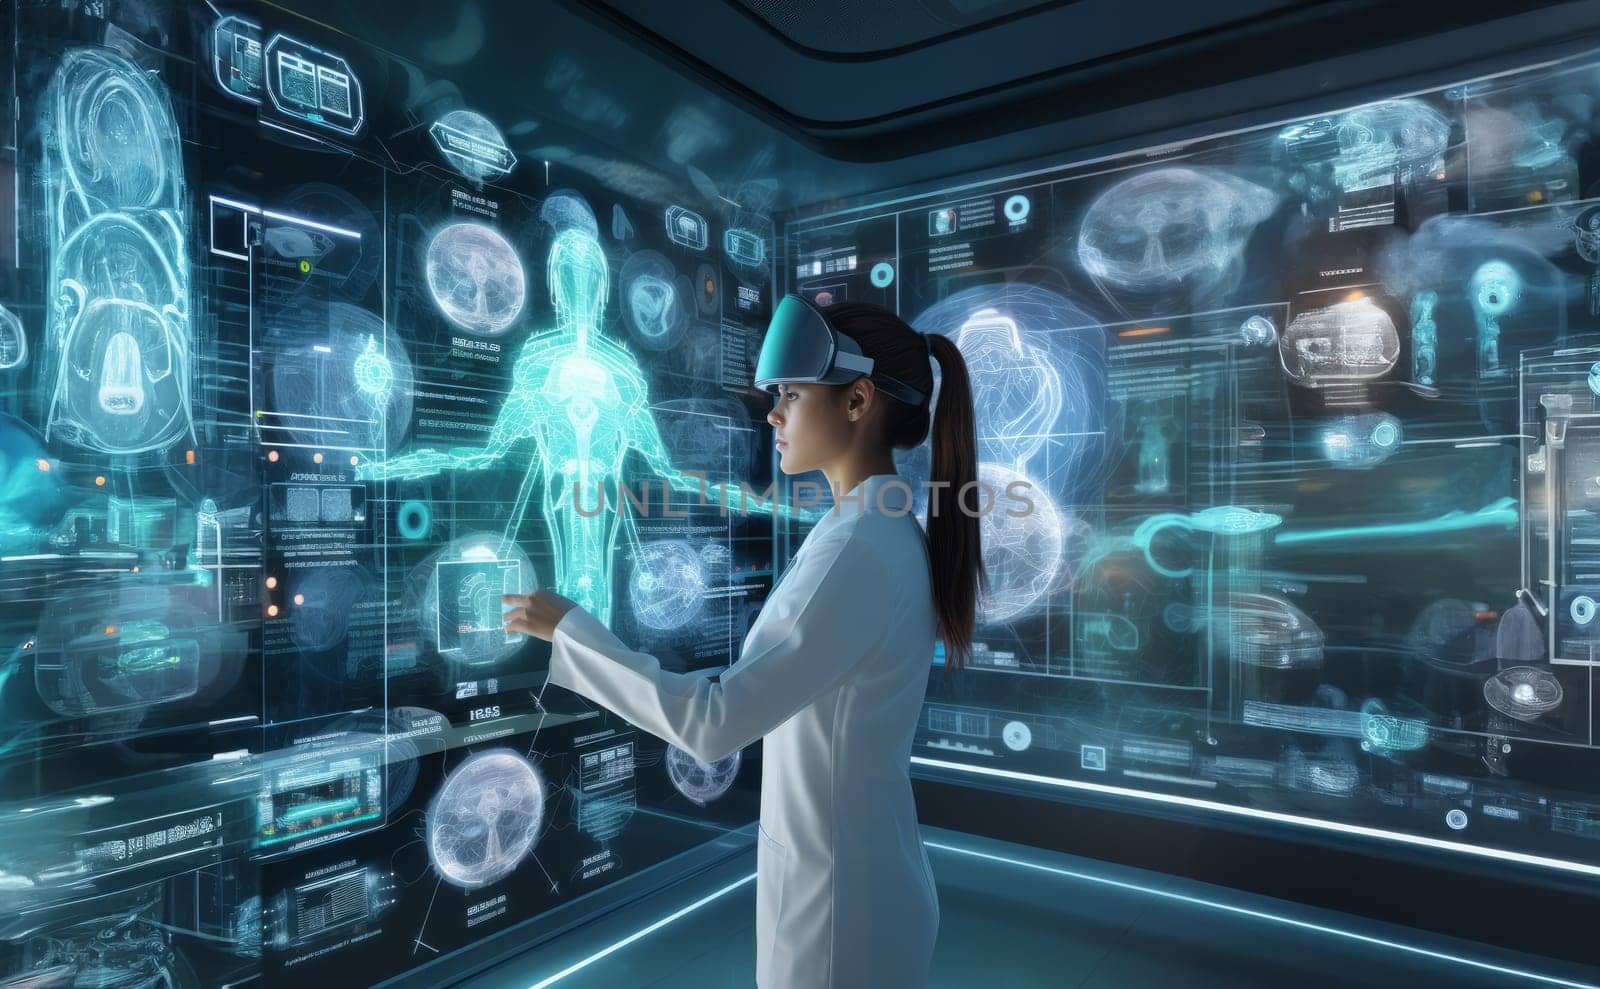 In a modern institute, a doctor conducts intricate research on the human body, surrounded by advanced medical holograms, delving into the complexities of medicine with cutting-edge technology and expertise.